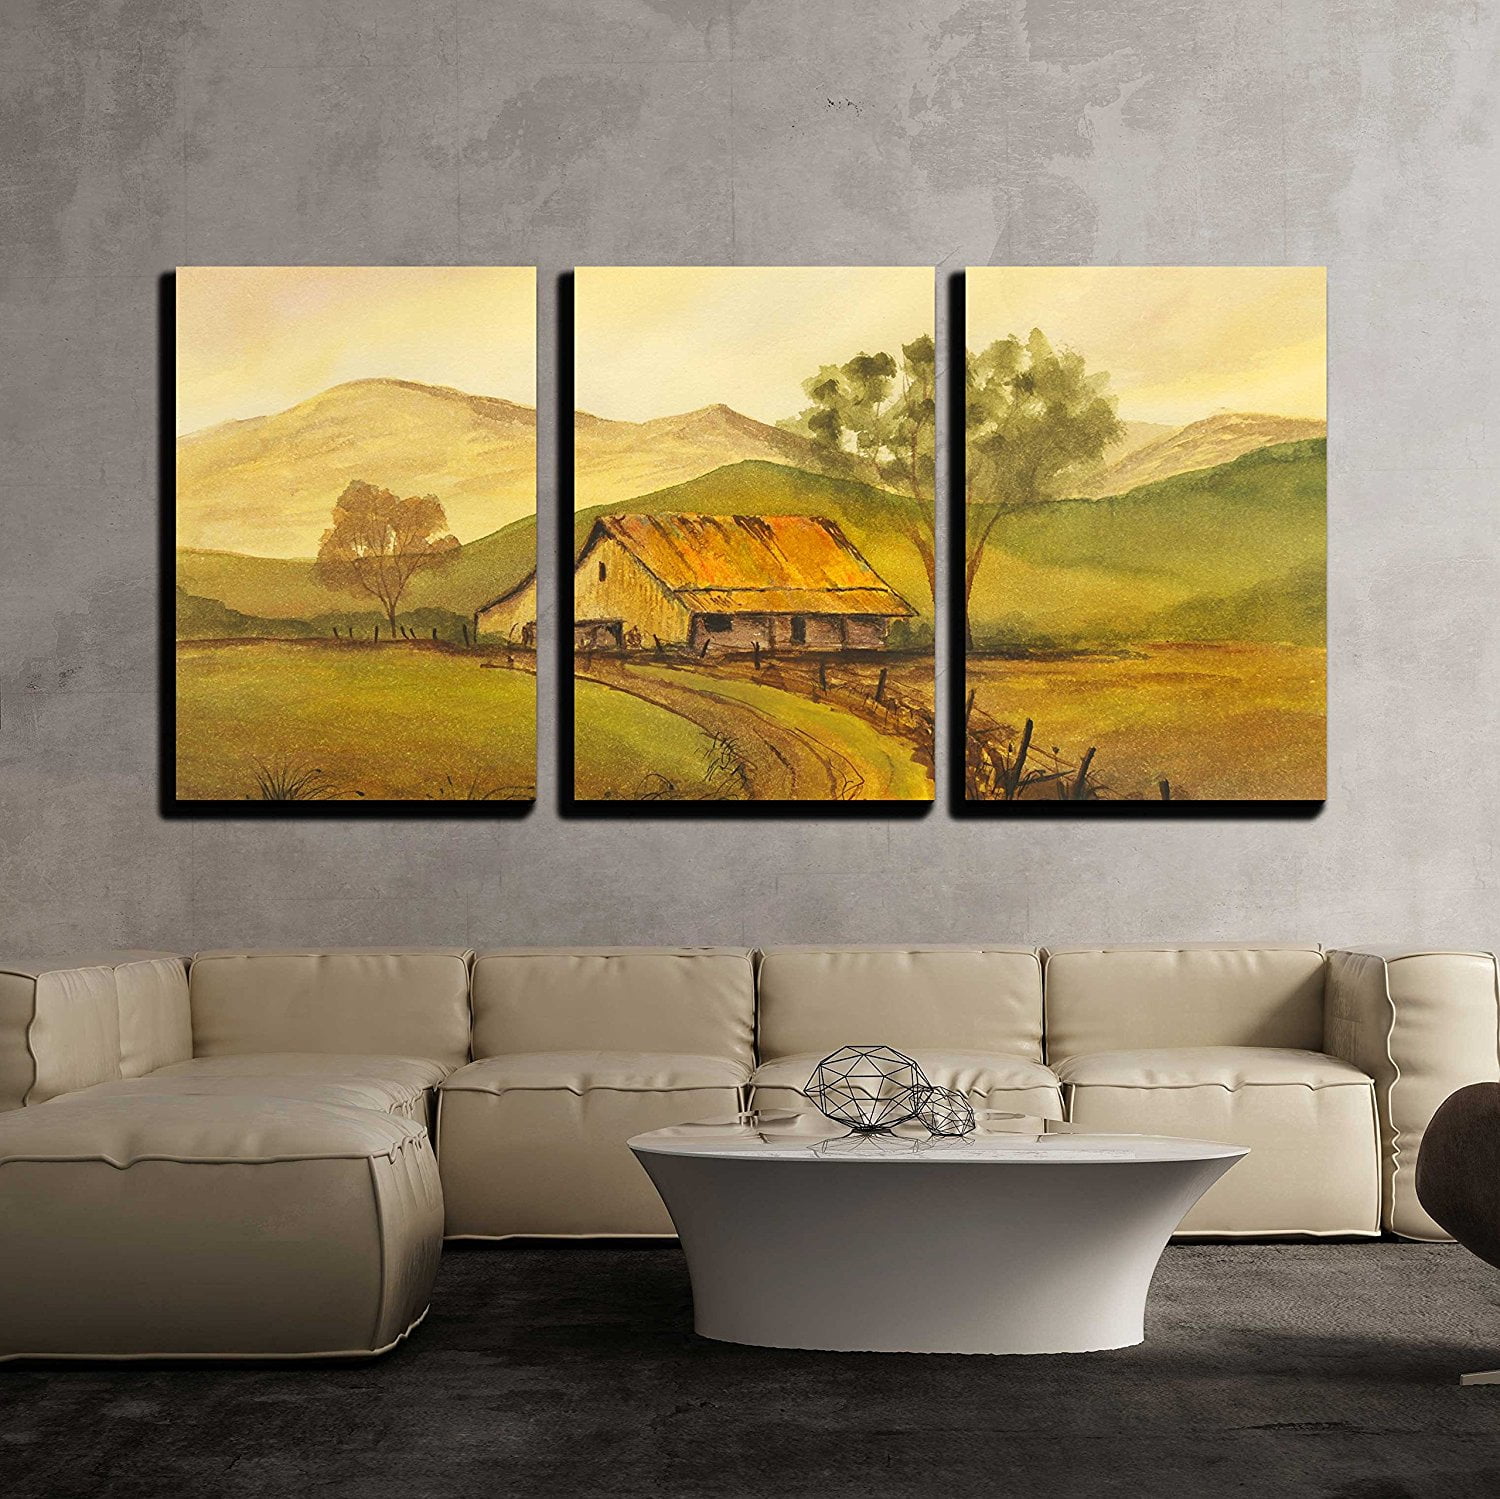 Wall26 3 Piece Canvas Wall Art - Very Nice Original Watercolor Painting ...